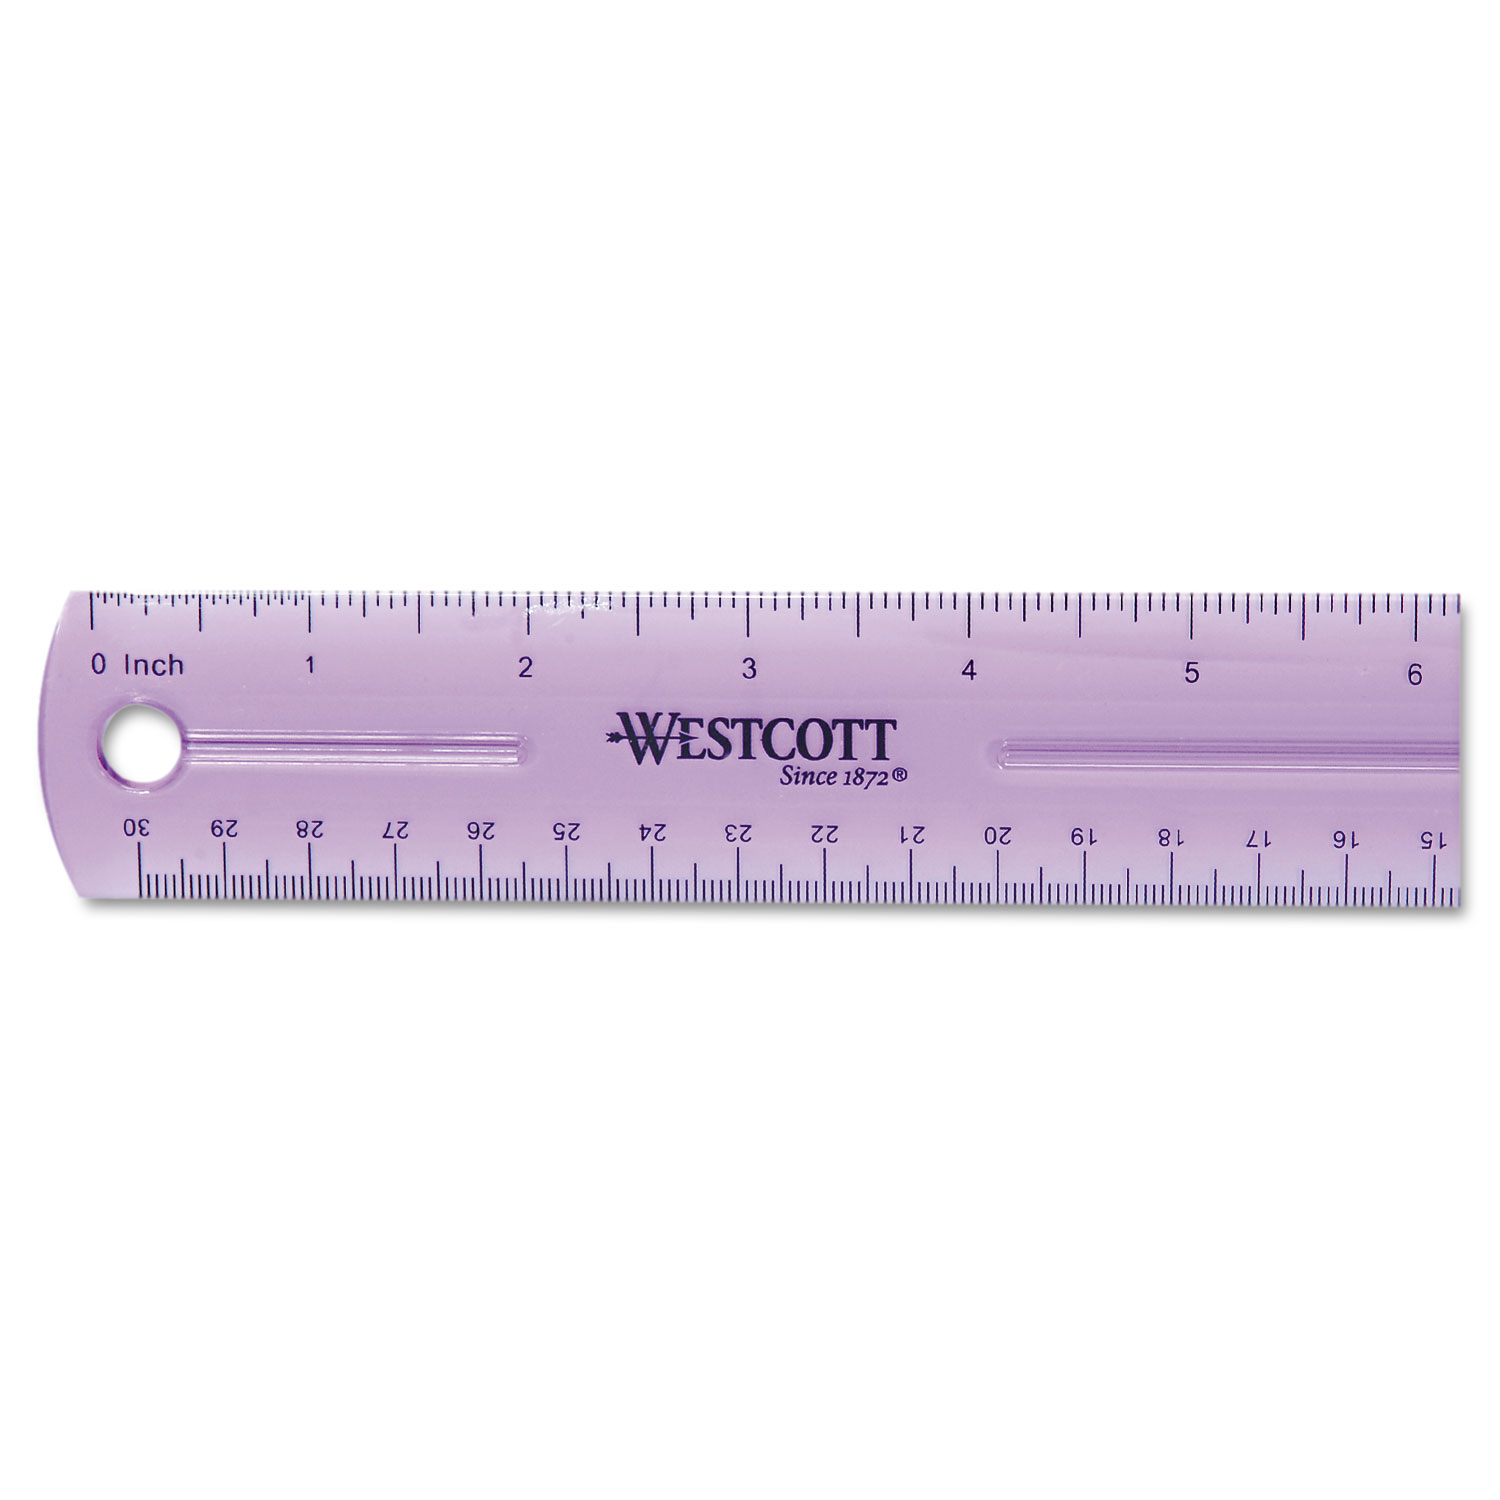 1" 1/2” 1/4” 1/“8 1/16" Colored Vintage The Master 12-Inch 5-In-1 Plastic Ruler 